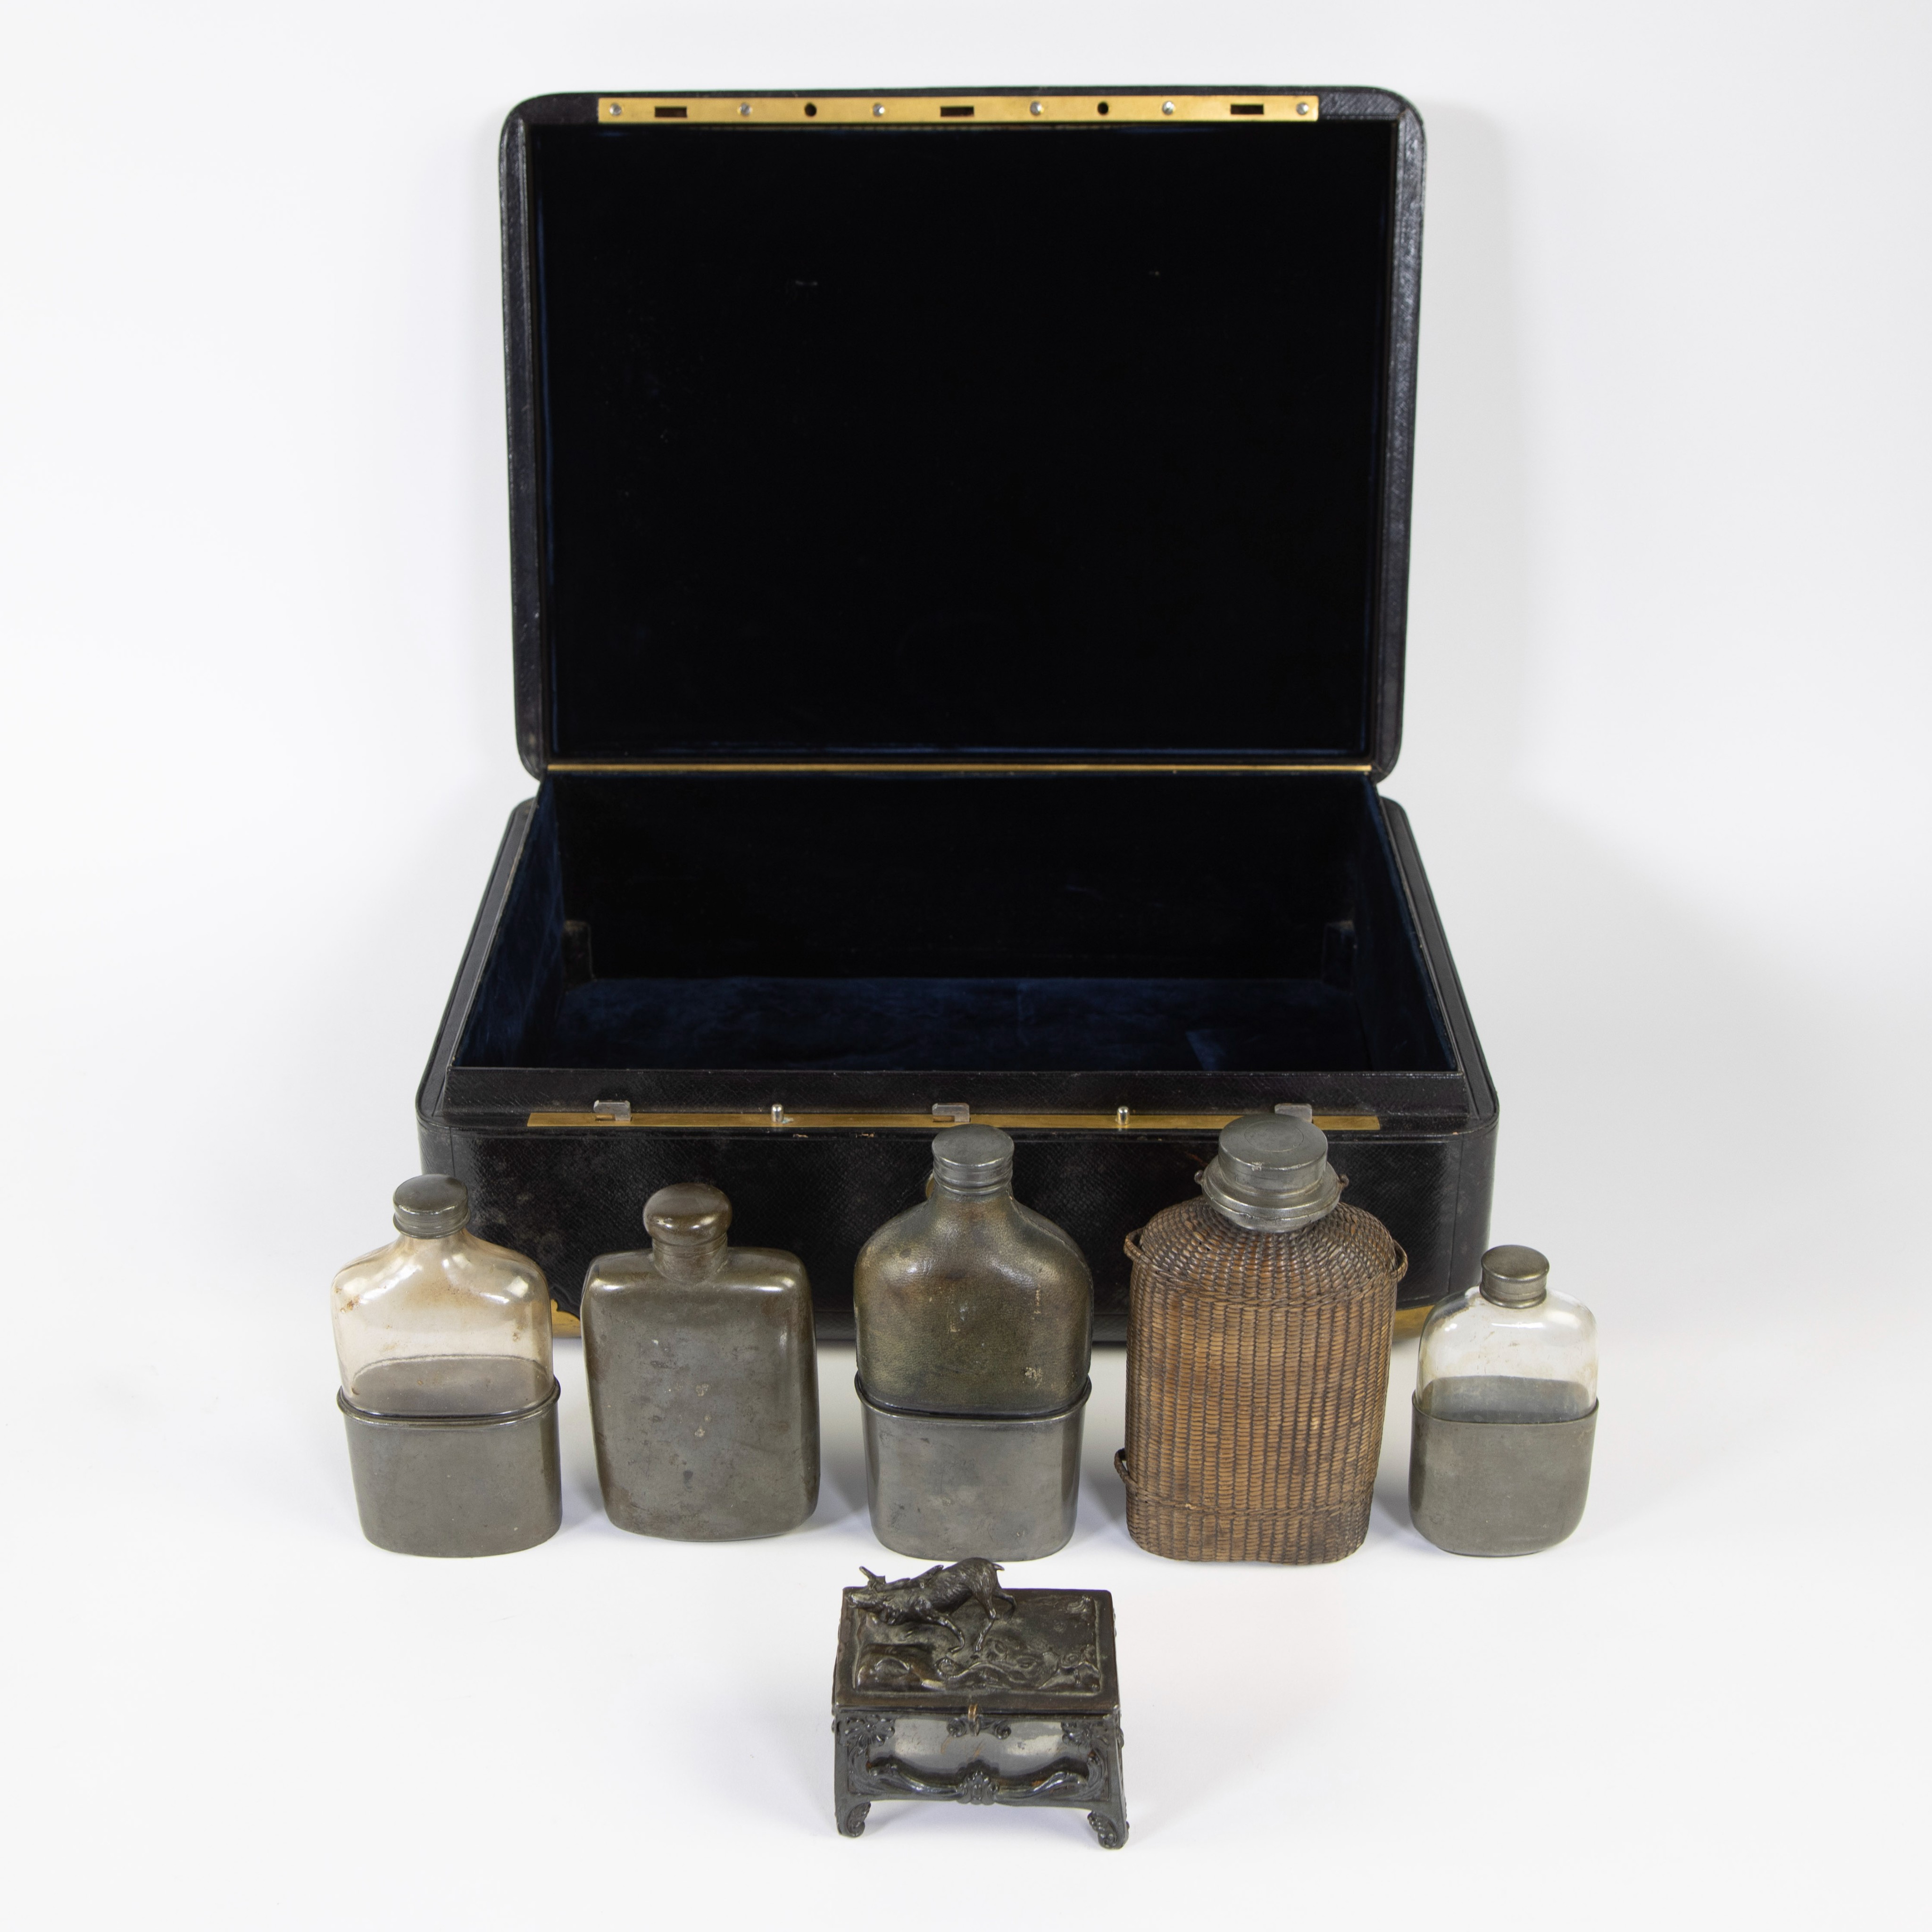 Money box of the nobility (with initials) of a baron and collection of hip flasks and a small box